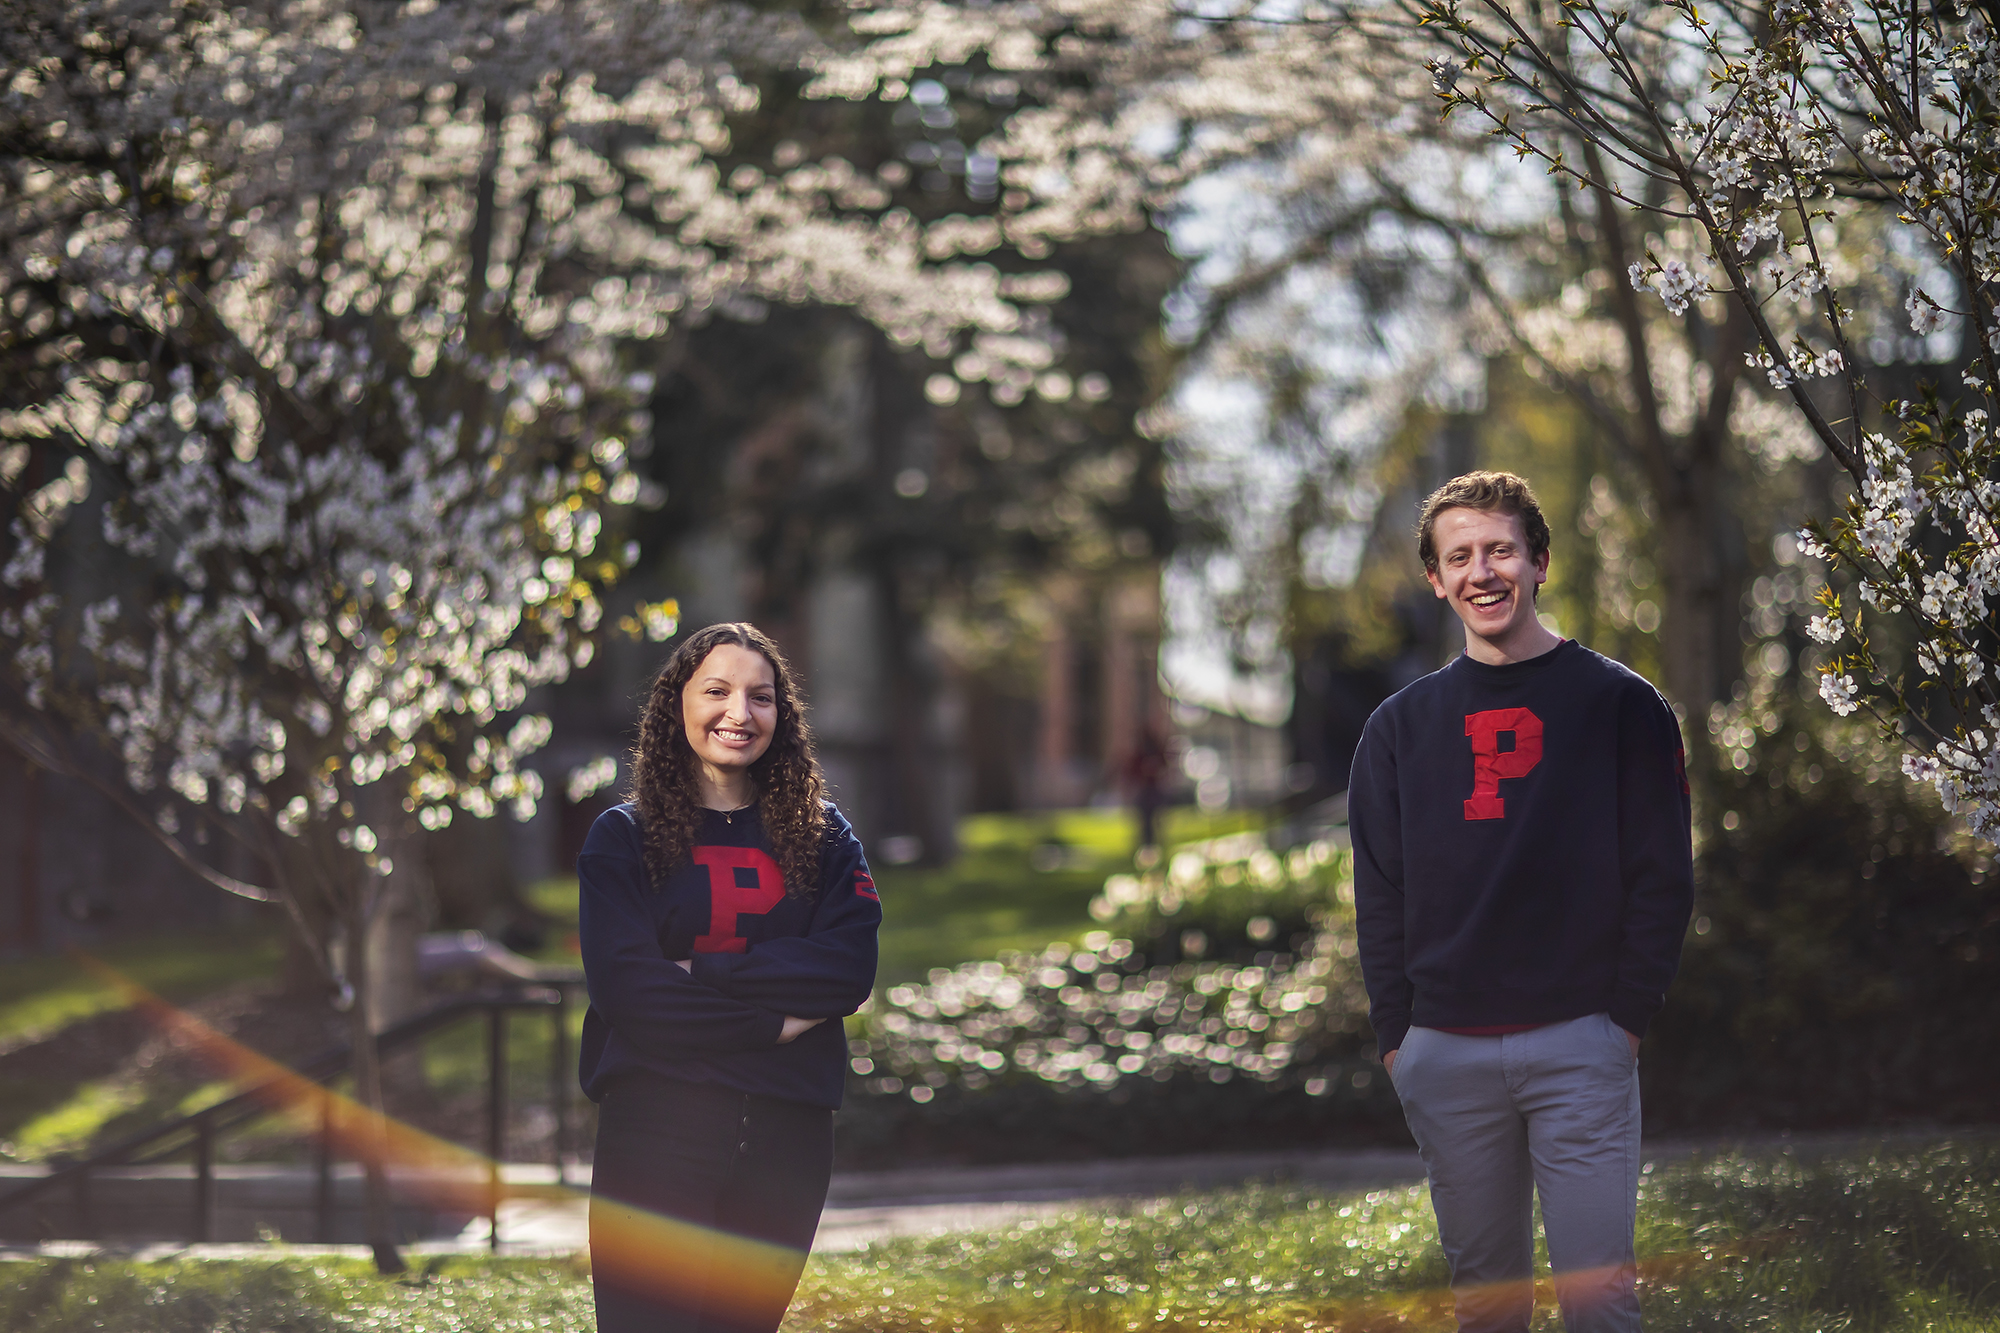 Two students wearing sweaters with the letter P standing outside